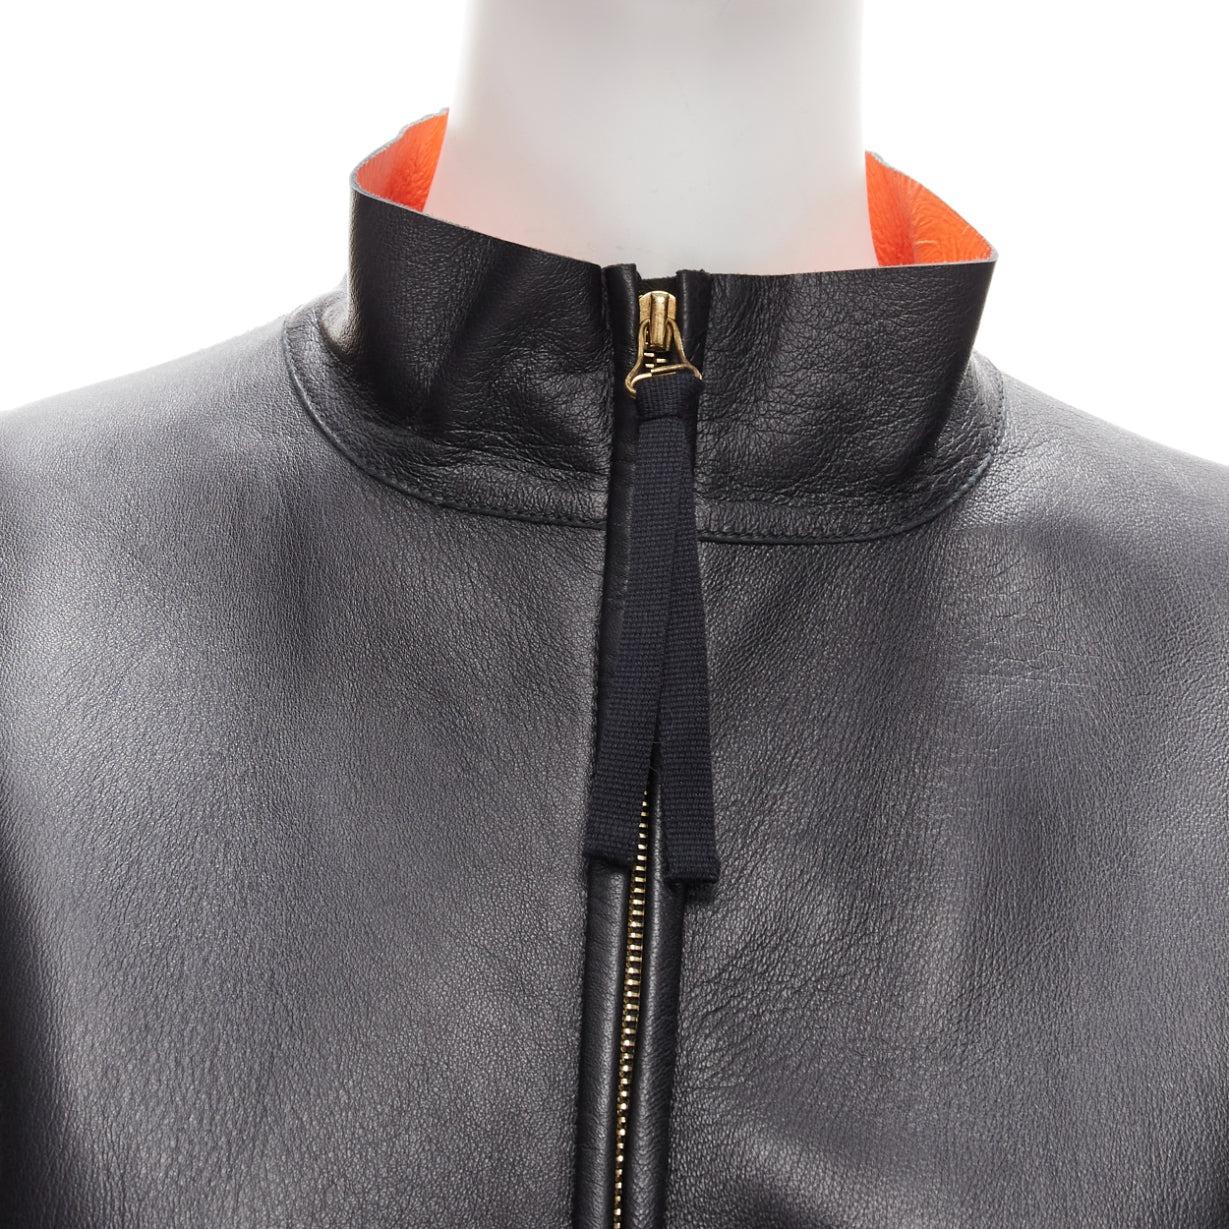 MARNI 2012 black lambskin leather orange lined longline high collar coat IT38 XS
Reference: NKLL/A00008
Brand: Marni
Material: Lambskin Leather
Color: Black, Orange
Pattern: Solid
Closure: Zip
Lining: Orange Leather
Made in: